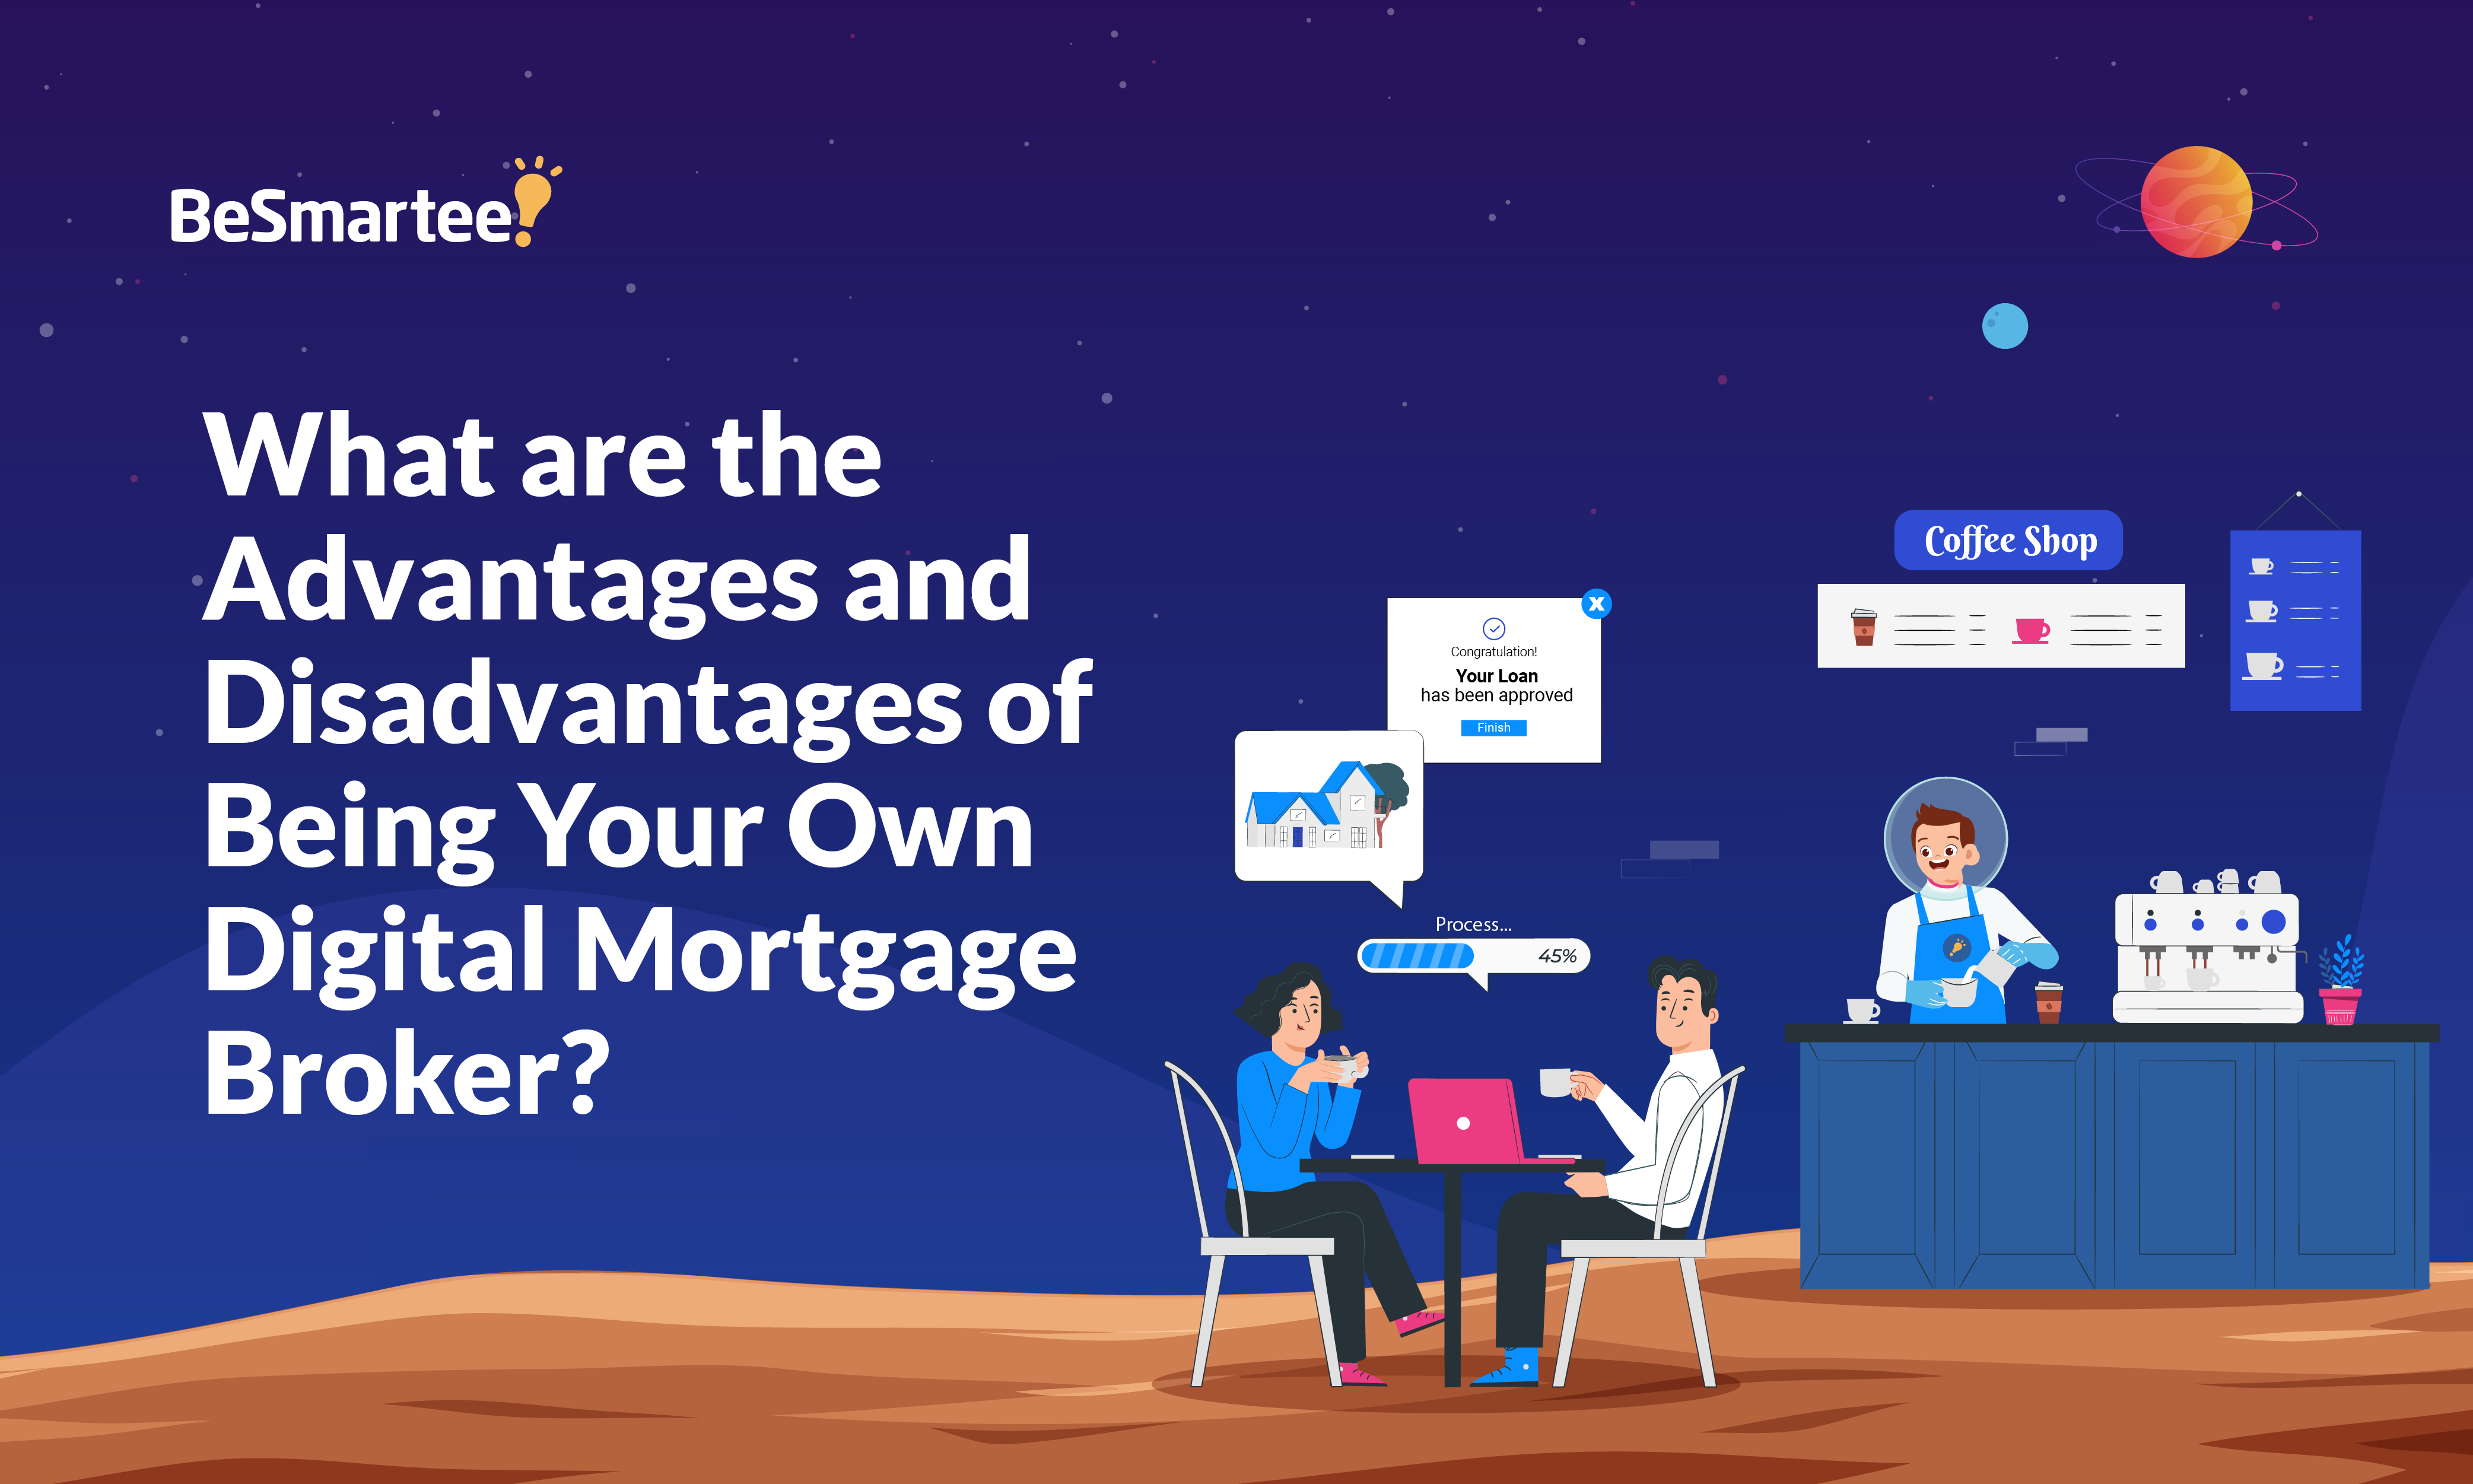 What are the Advantages and Disadvantages of Being Your Own Digital Mortgage Broker?